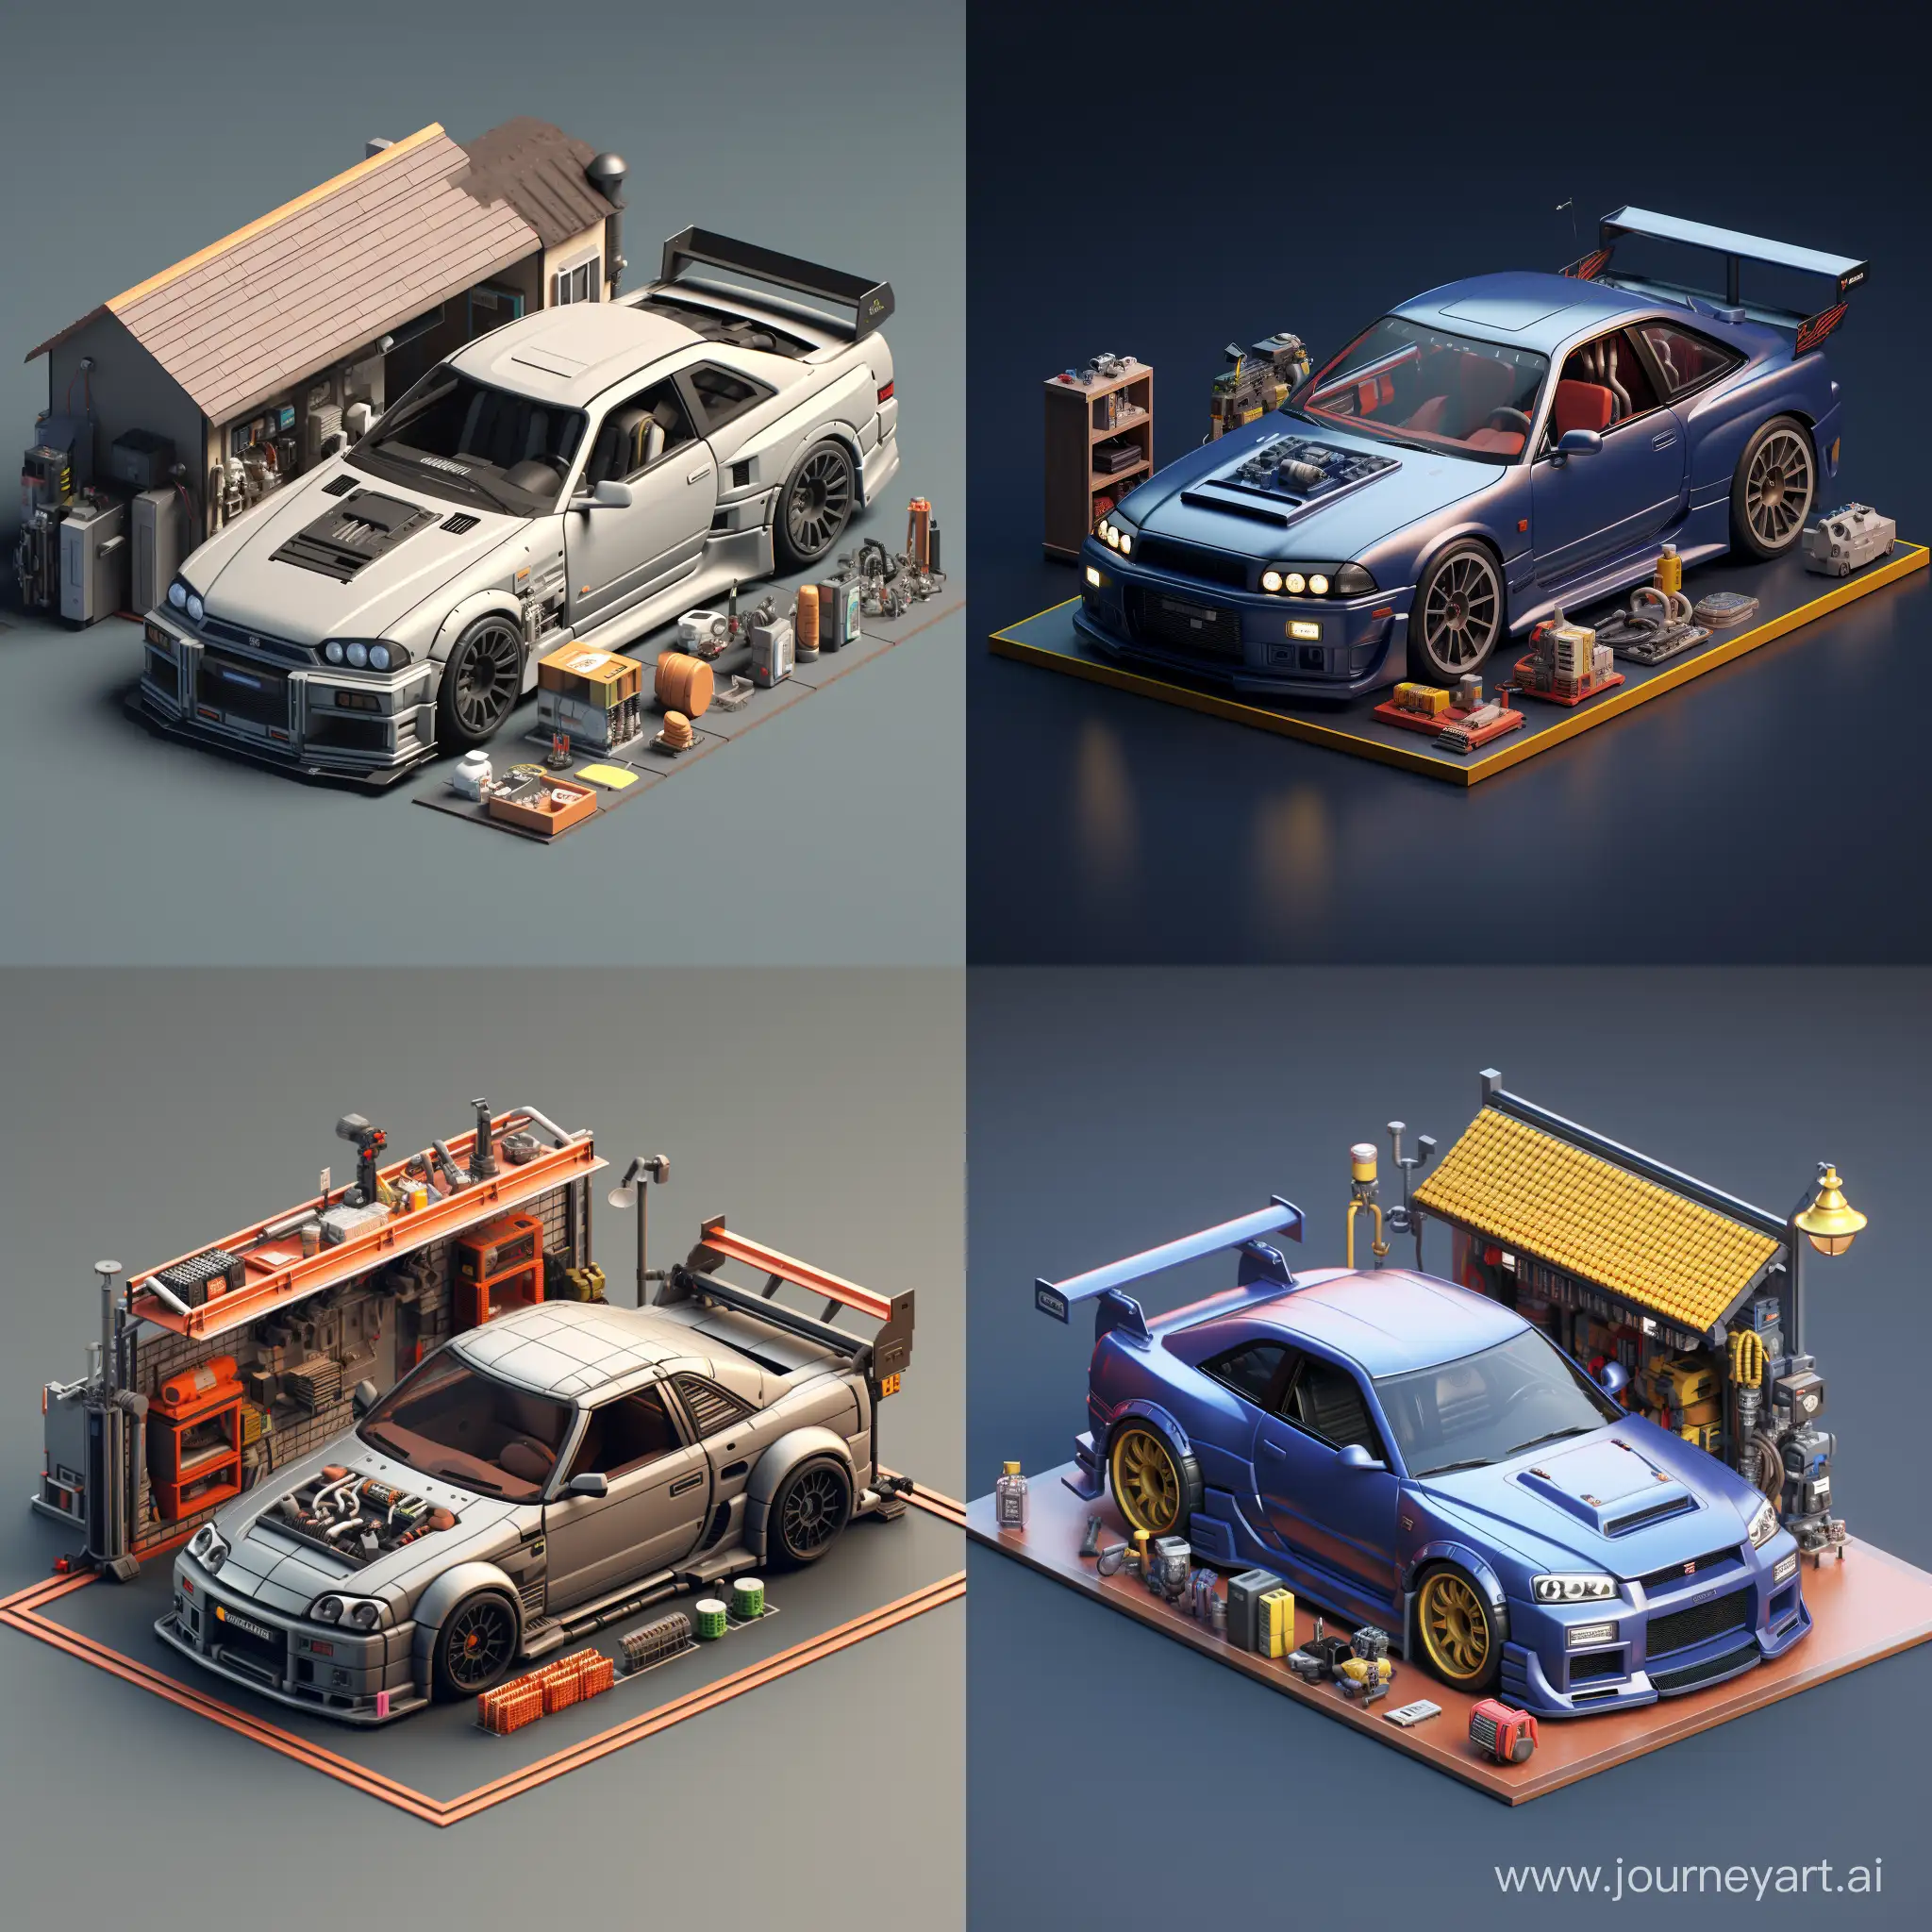 isometric view of a garage with a nissan skyline, isometric, tiny, 3d render, unreal engine, intricate, detailed;